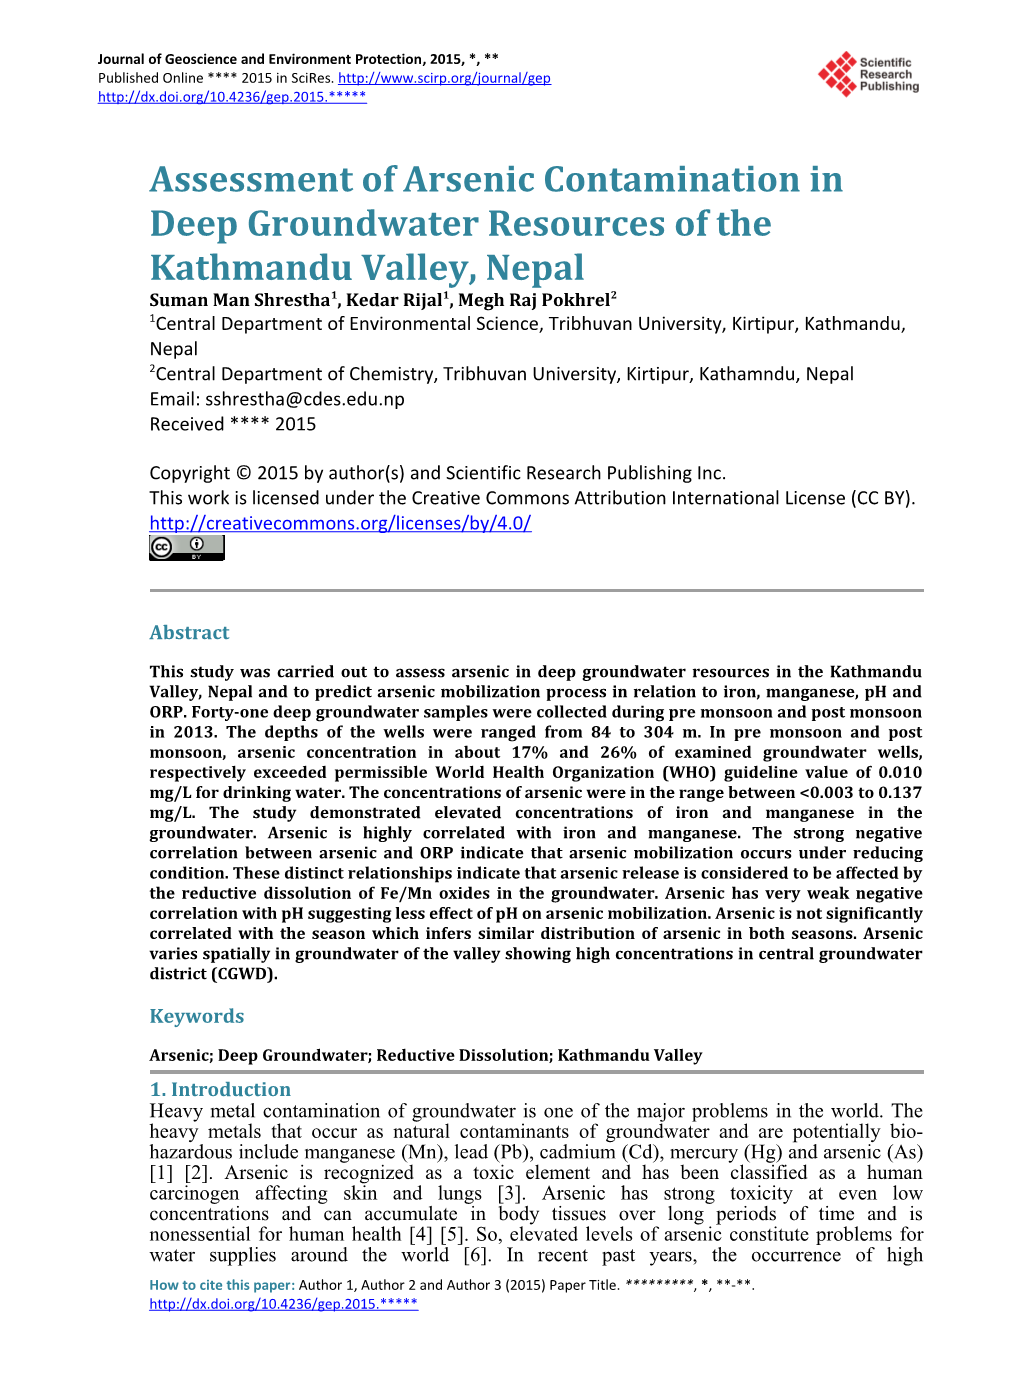 Assessment of Arsenic Contamination in Deep Groundwater Resources of the Kathmandu Valley